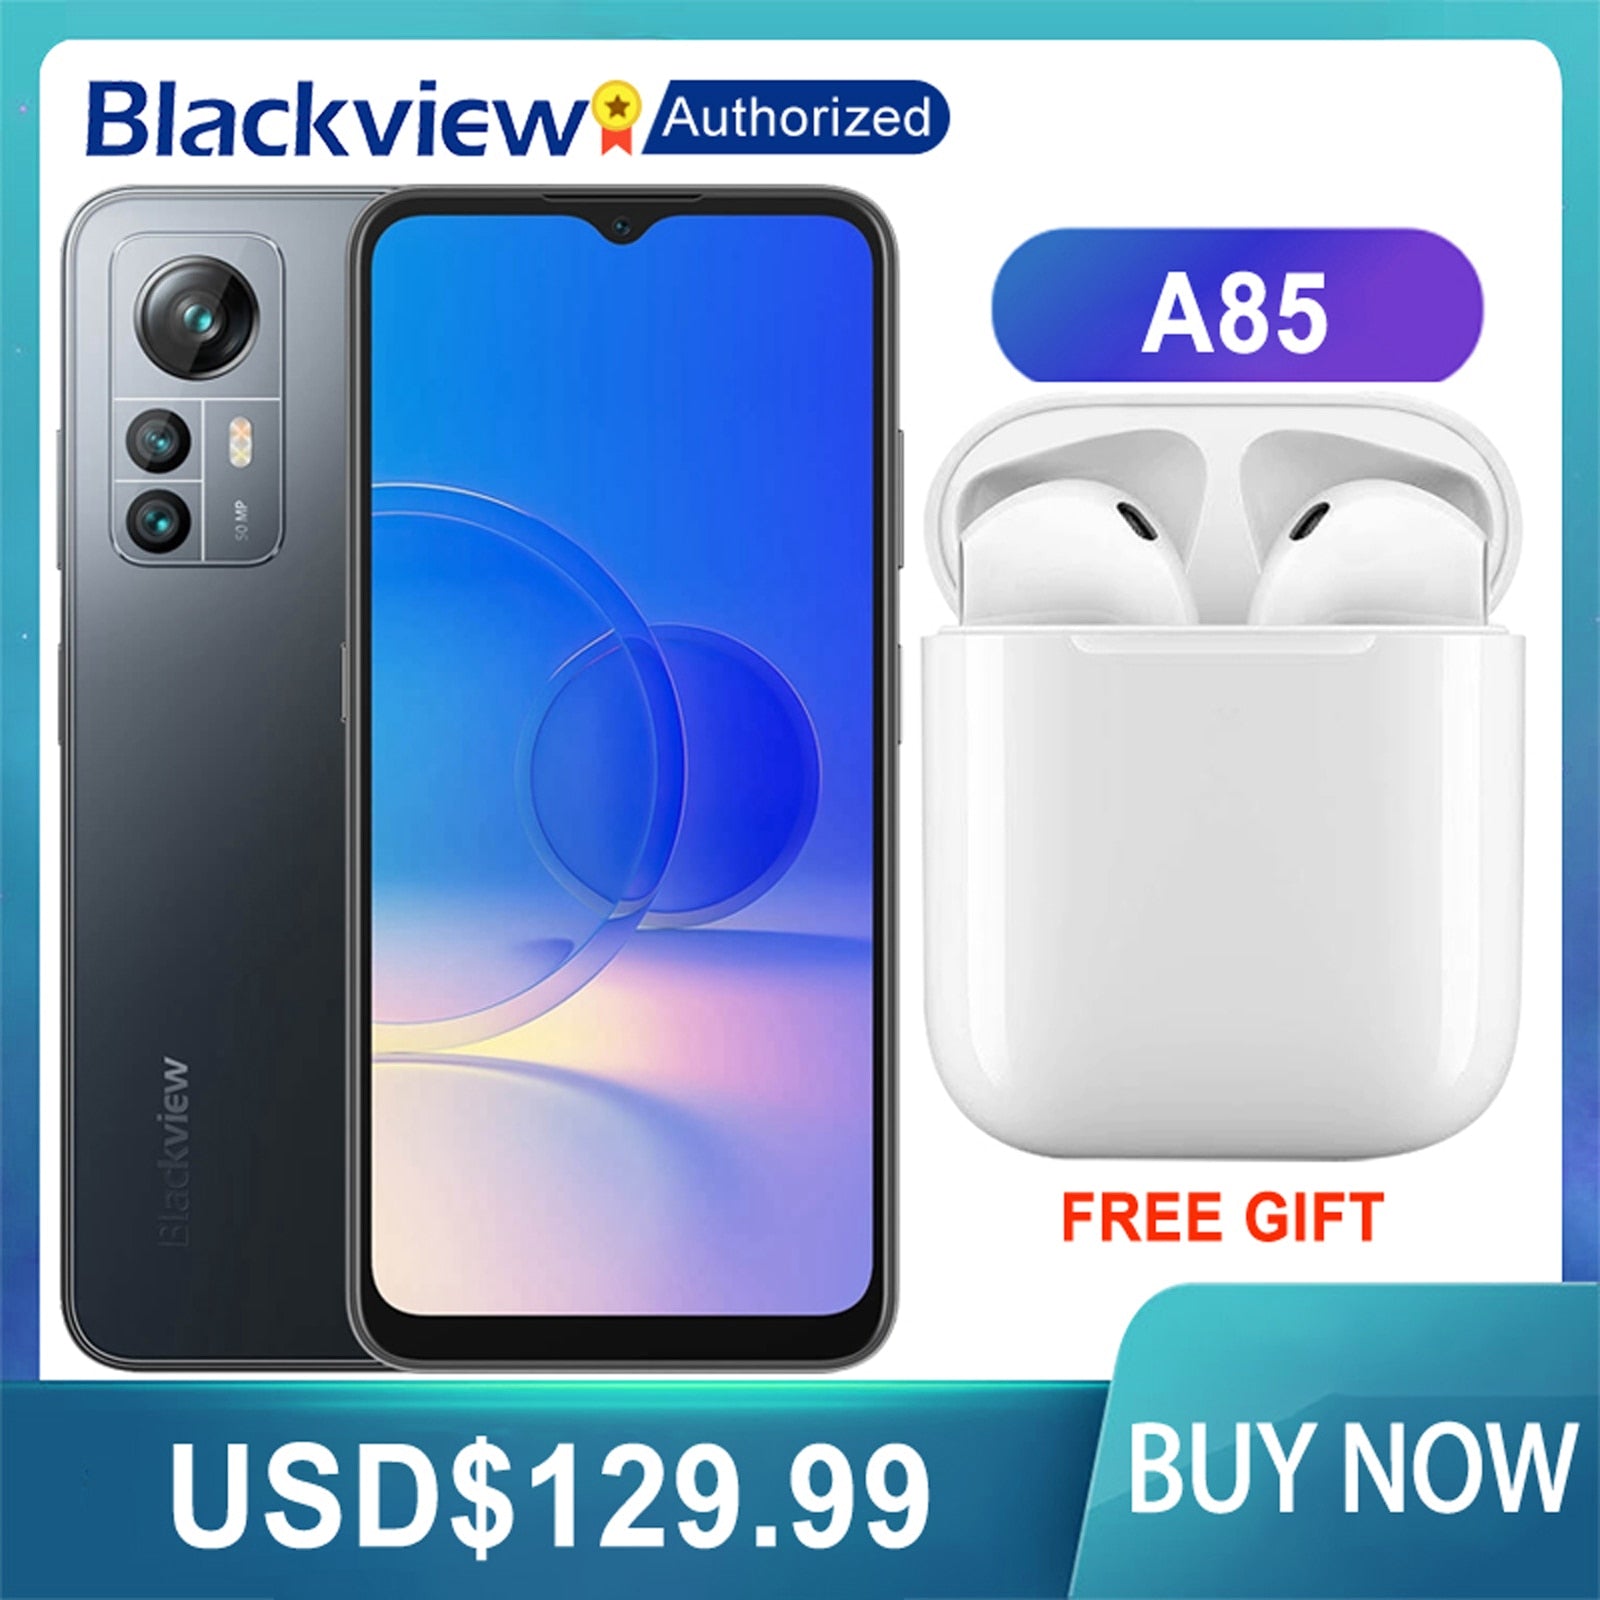 Blackview A85 Smartphone 6.5" Screen Android 12 Octa Core 8GB RAM+128GB ROM 4480mAh 50MP Rear Camera Cellphone 4G Mobile Phone